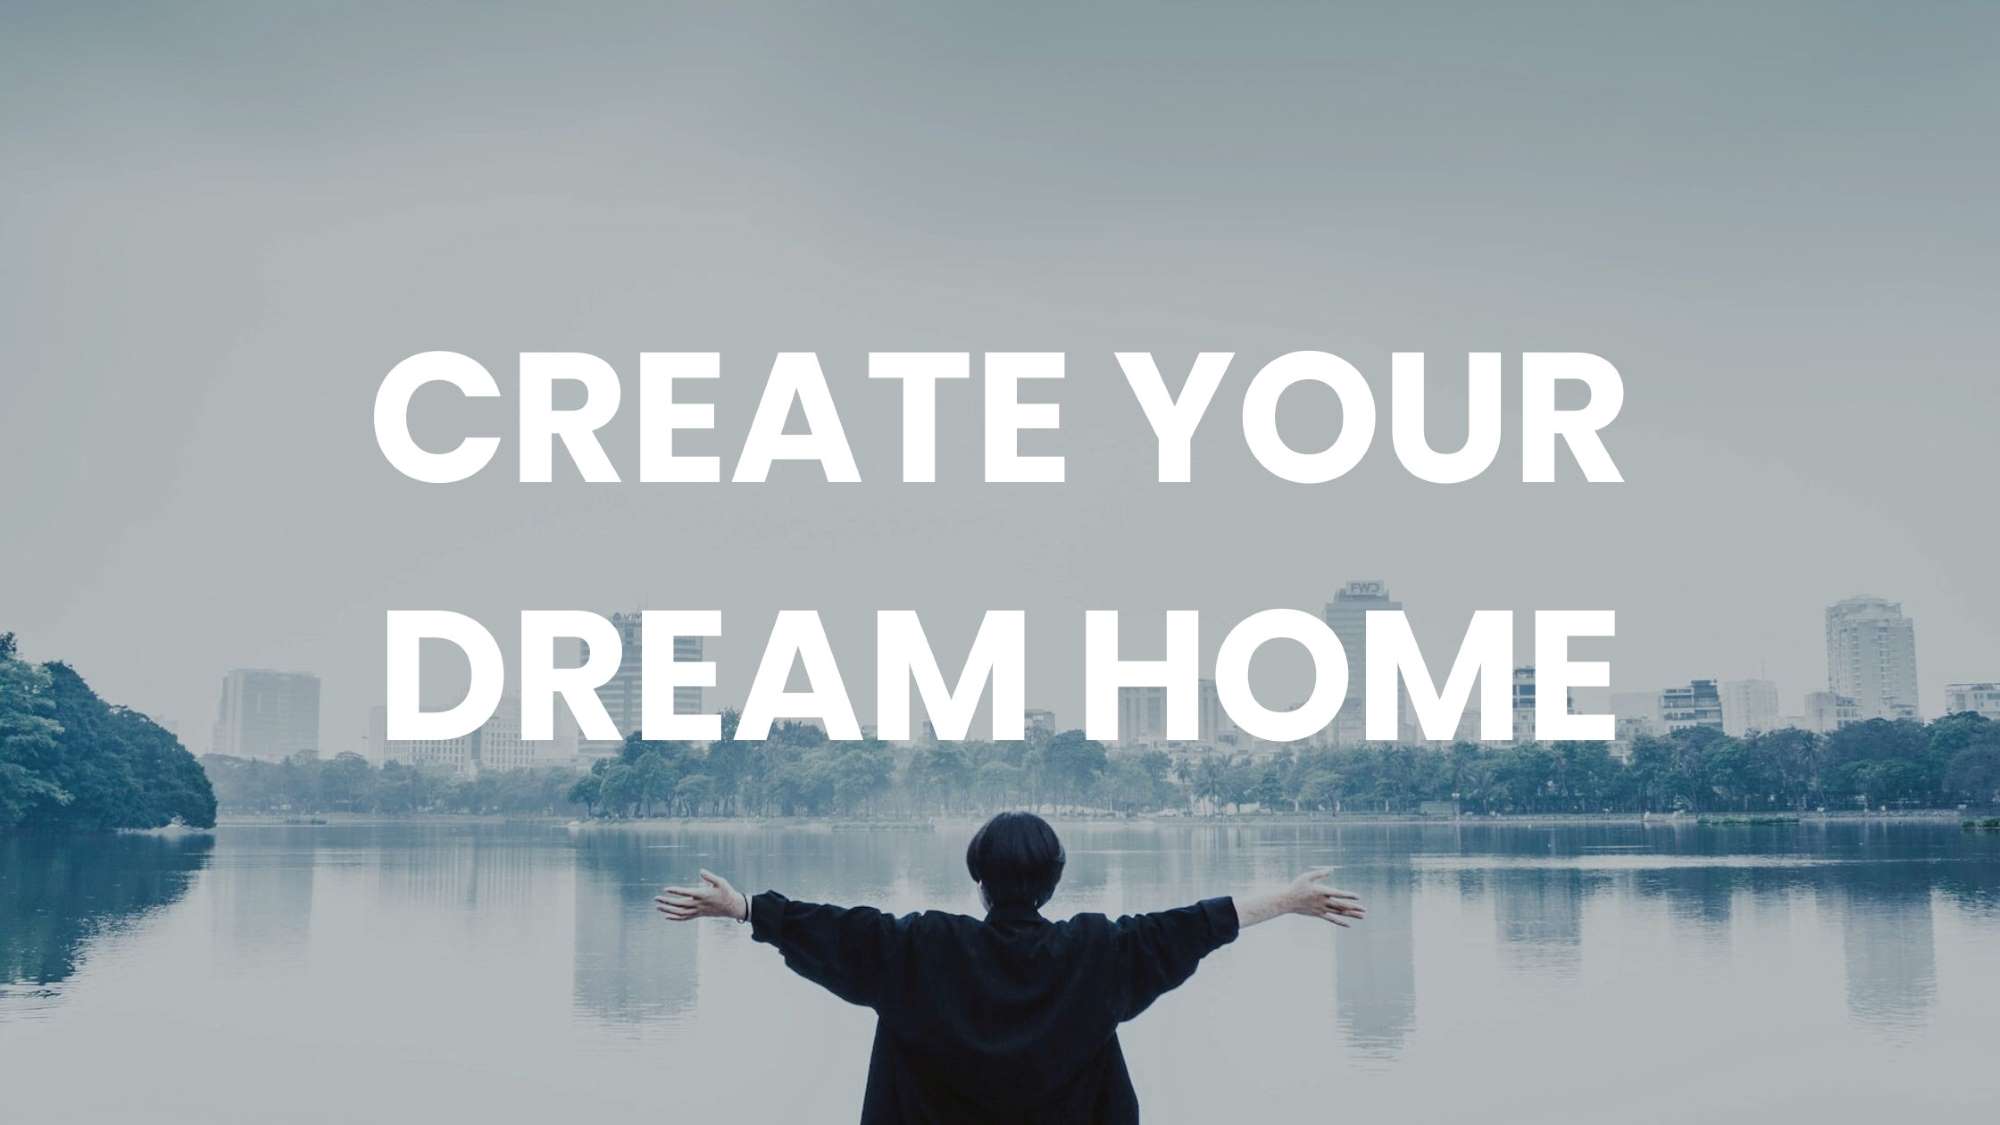 "Woman with arms wide in front of a lake, homes behind, text 'CREATE YOUR DREAM HOME'."